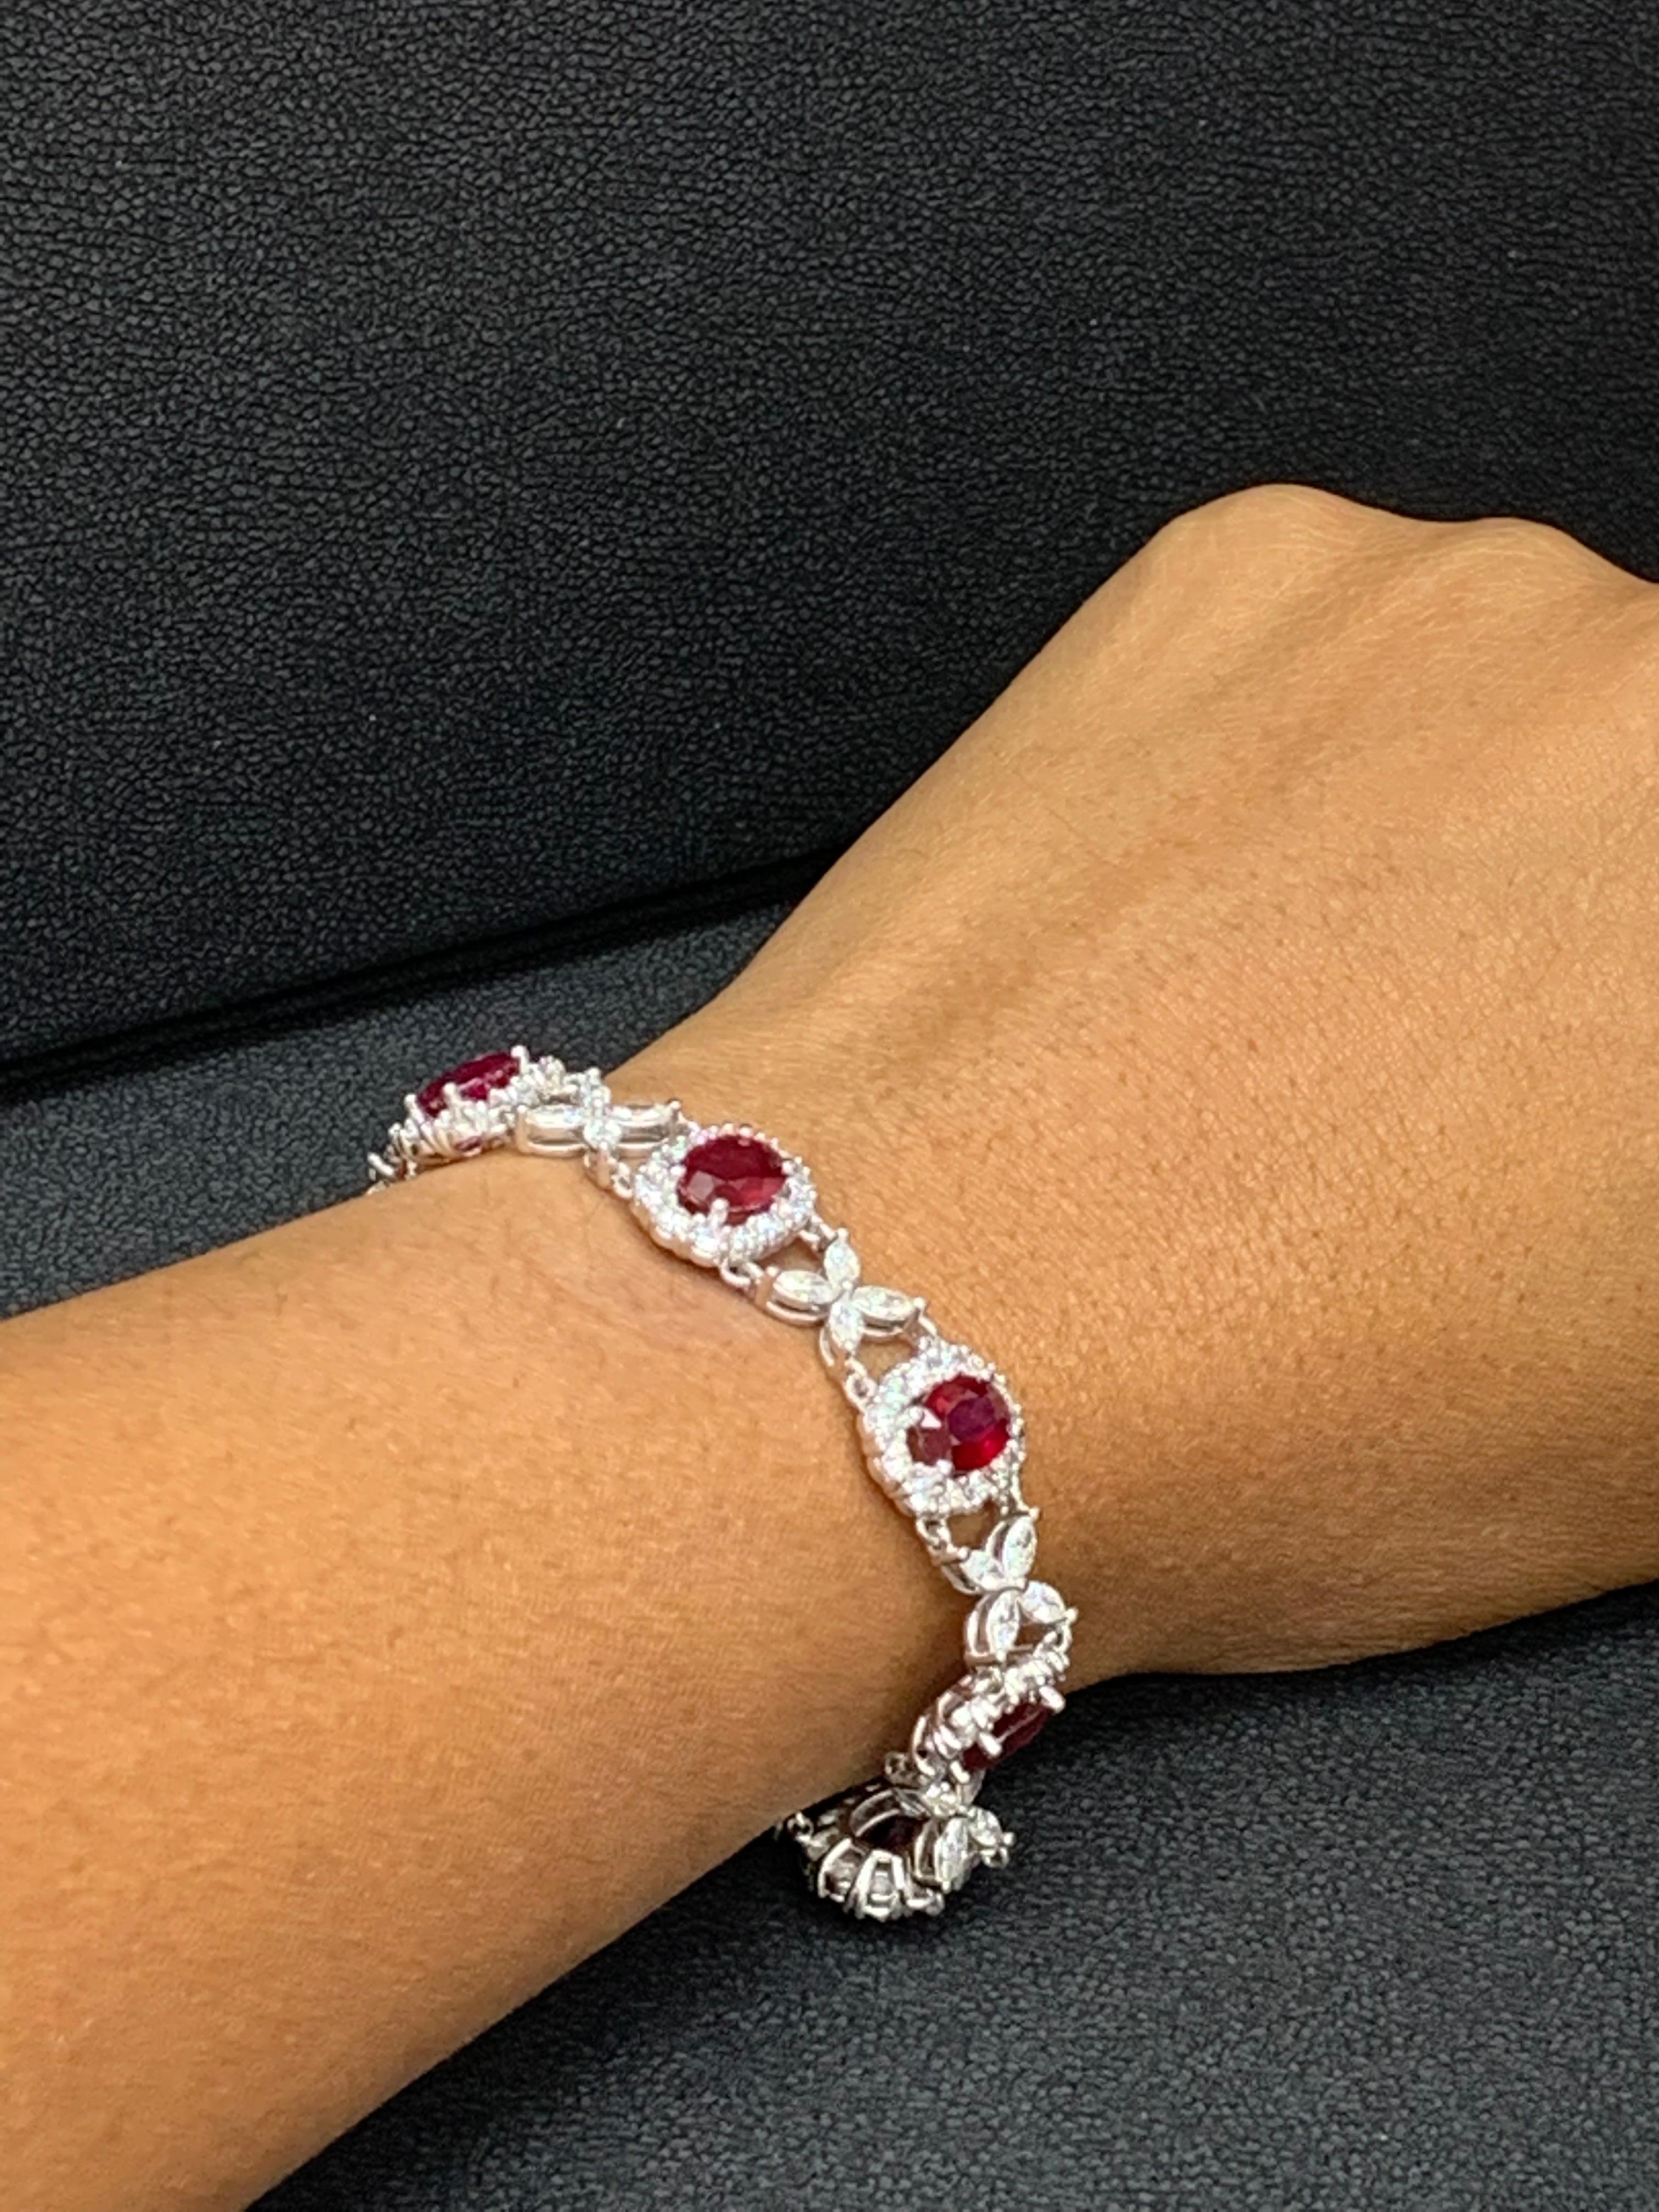 12.54 Carat Oval Cut Ruby and Diamond Tennis Bracelet in 14K White Gold For Sale 11